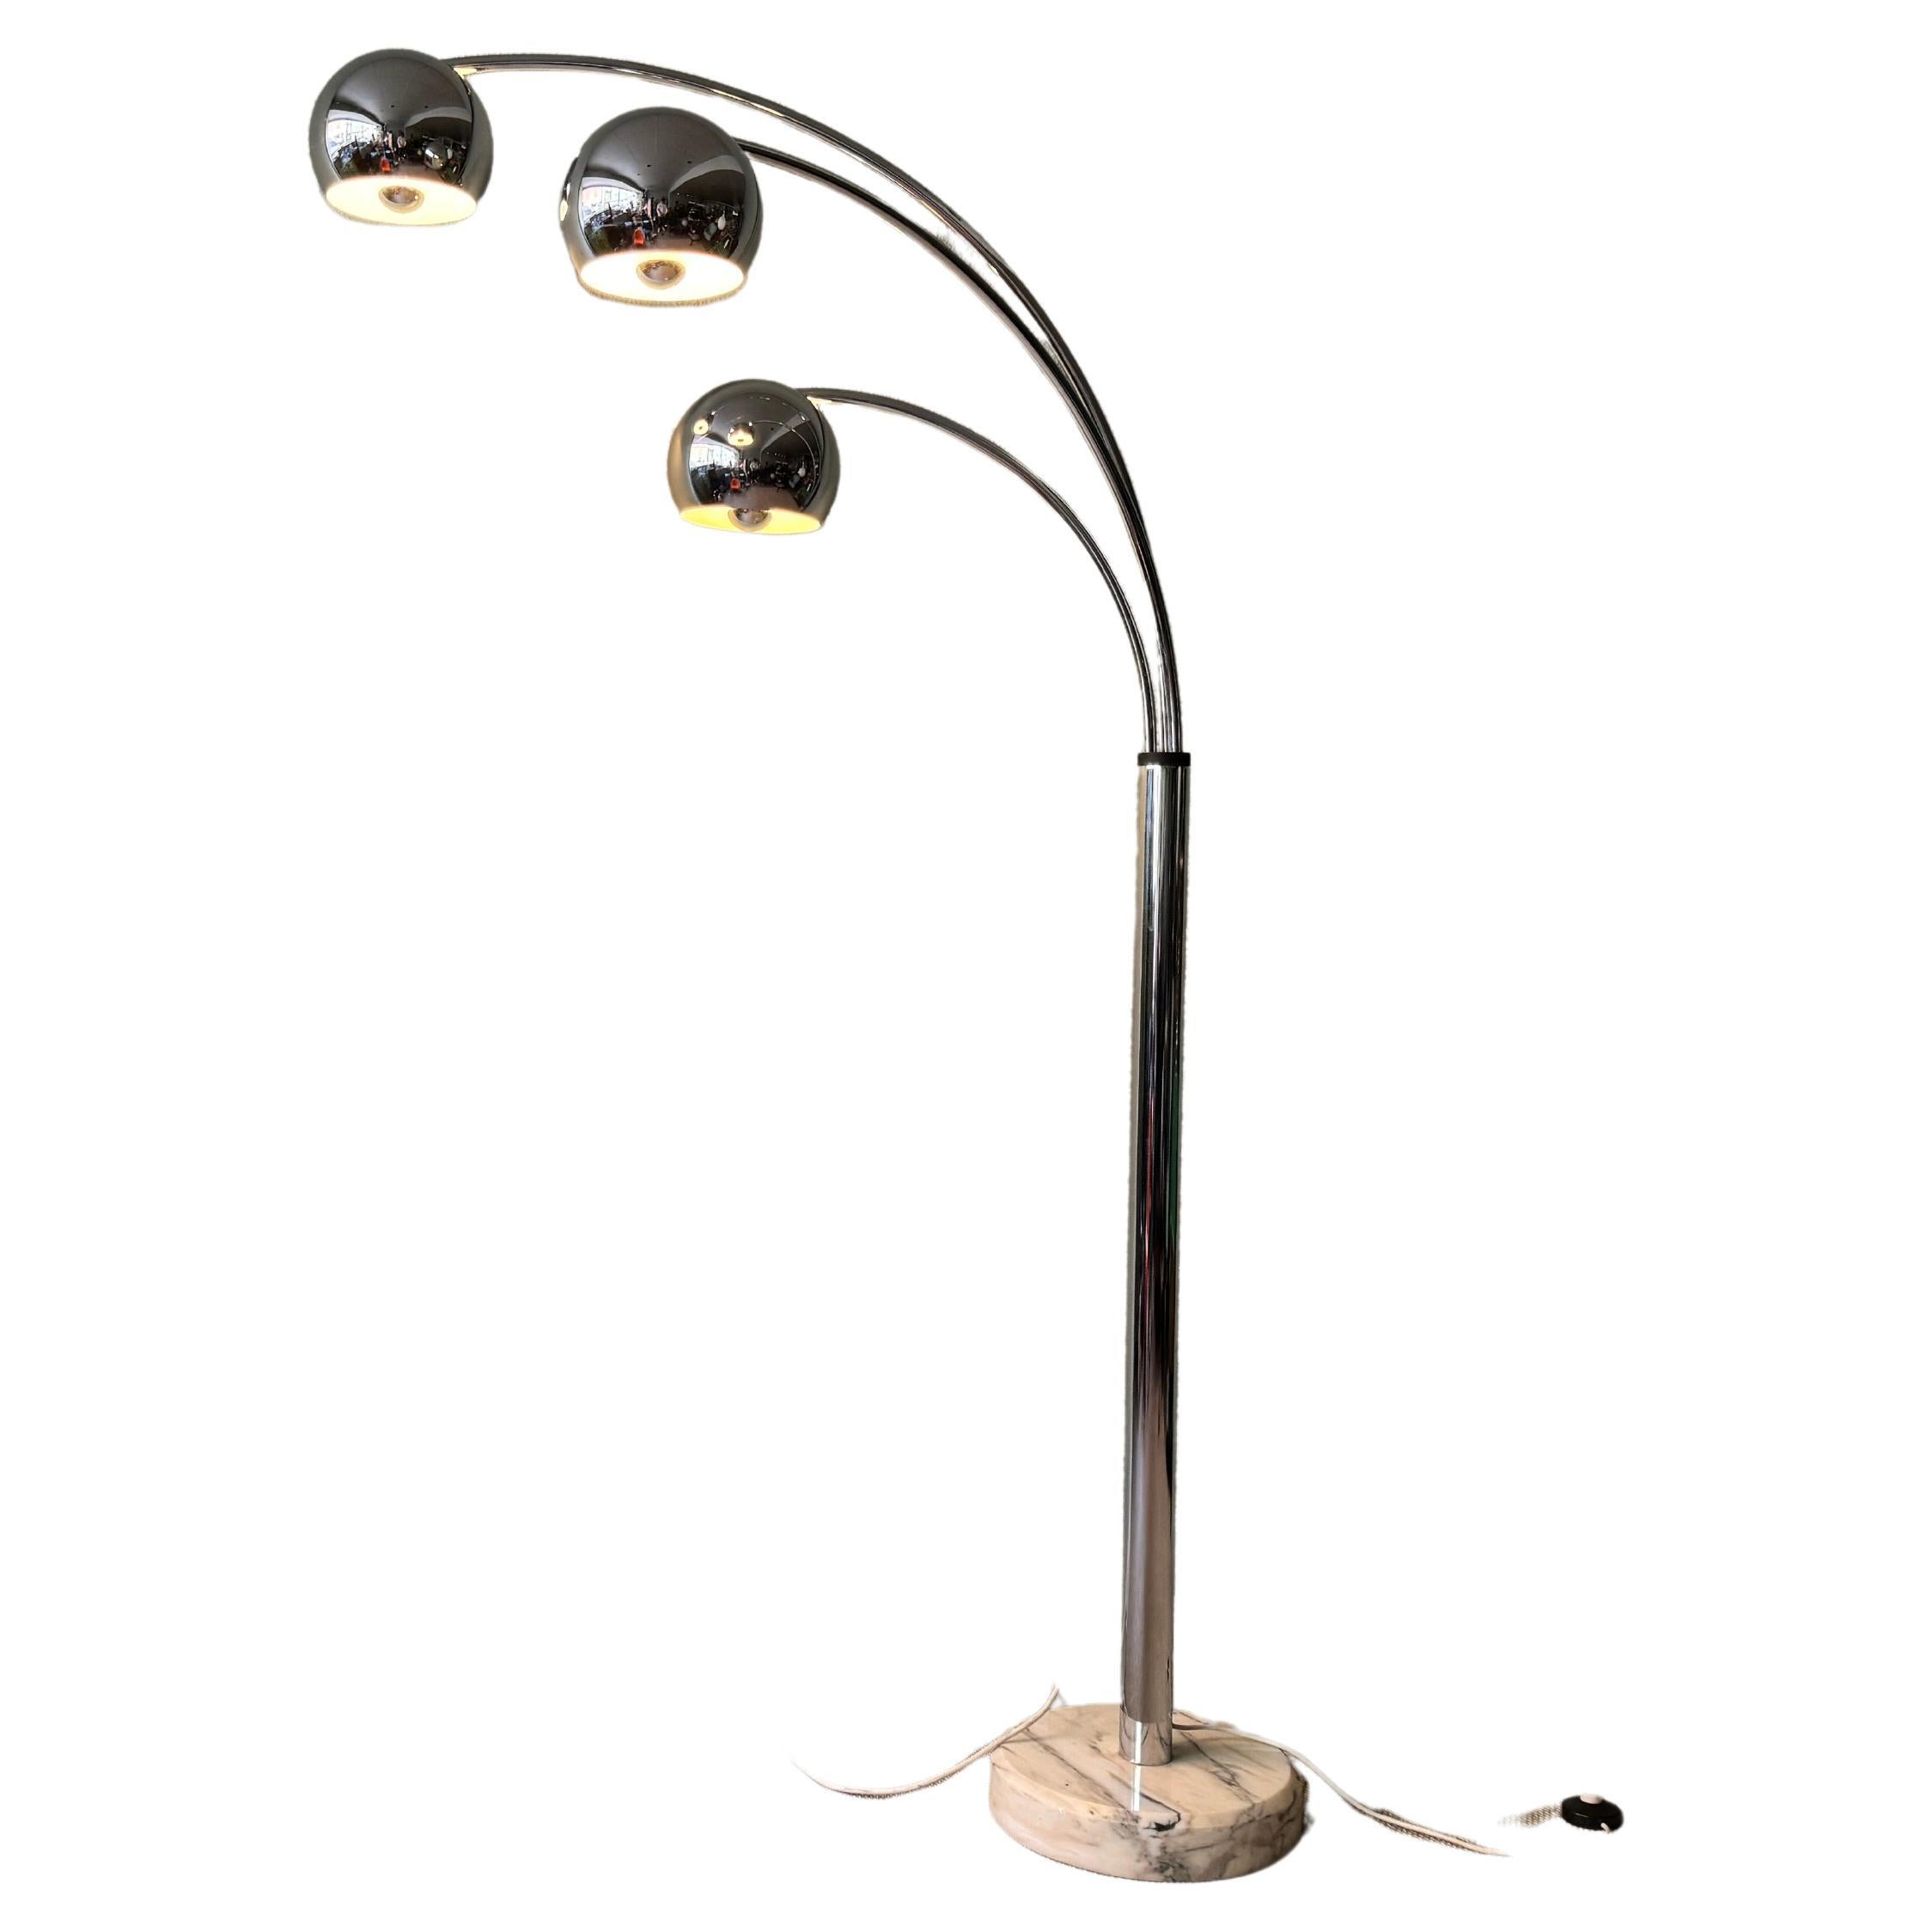 Italian Chromed Steel Floor Lamp with Three Arms by Goffredo Reggiani, 1970s For Sale